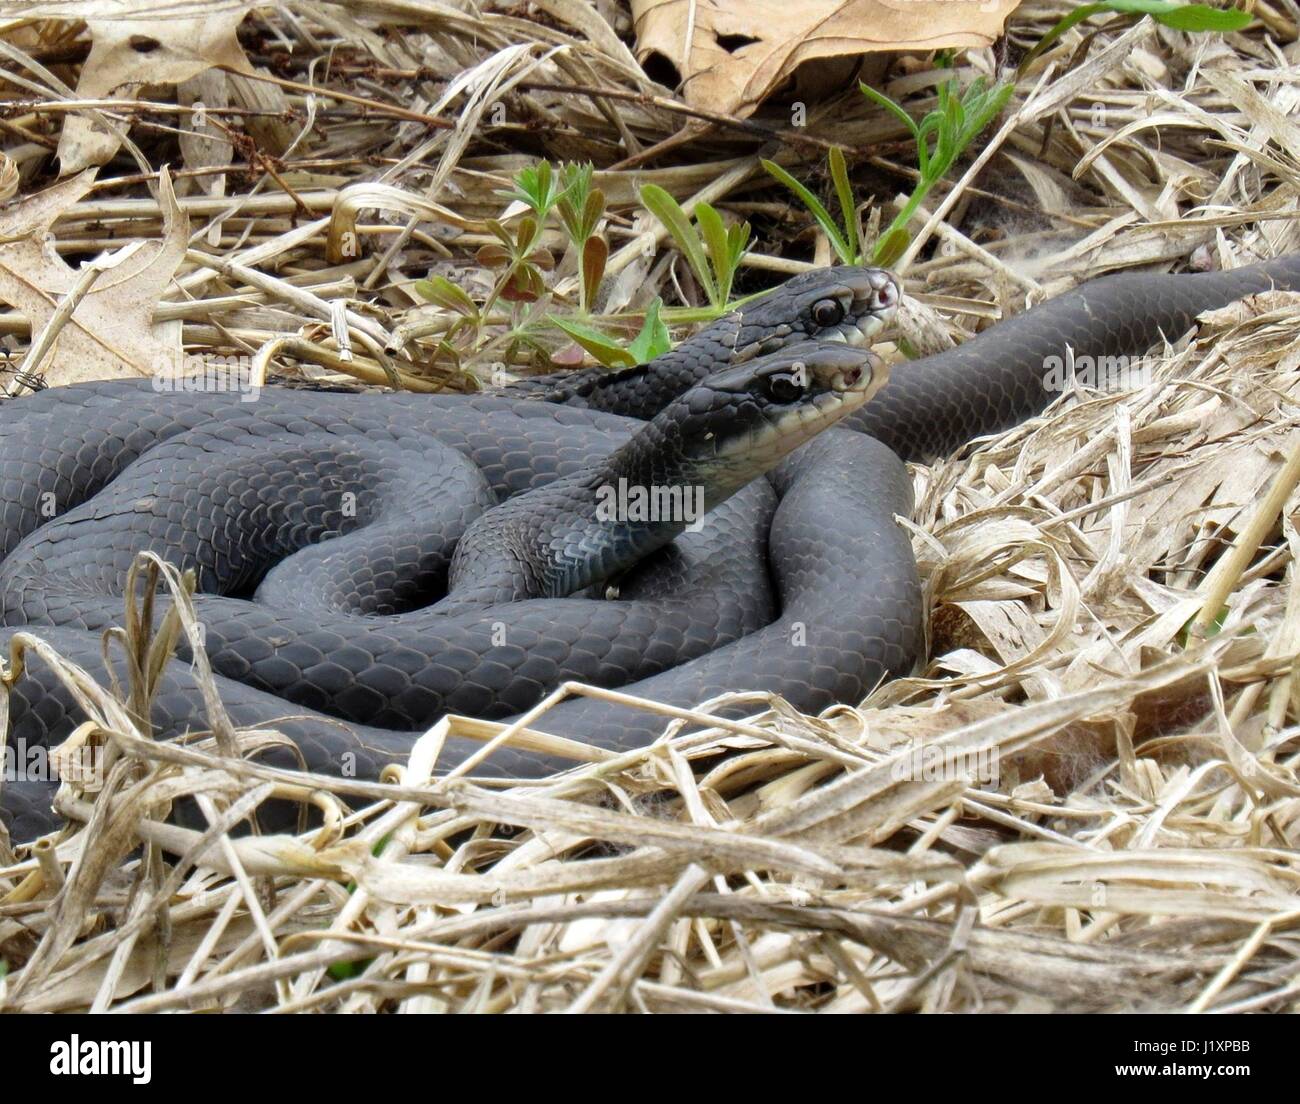 Two black racer snakes at Horseshoe Bend at Port Louisa National Wildlife Refuge in Iowa. Stock Photo